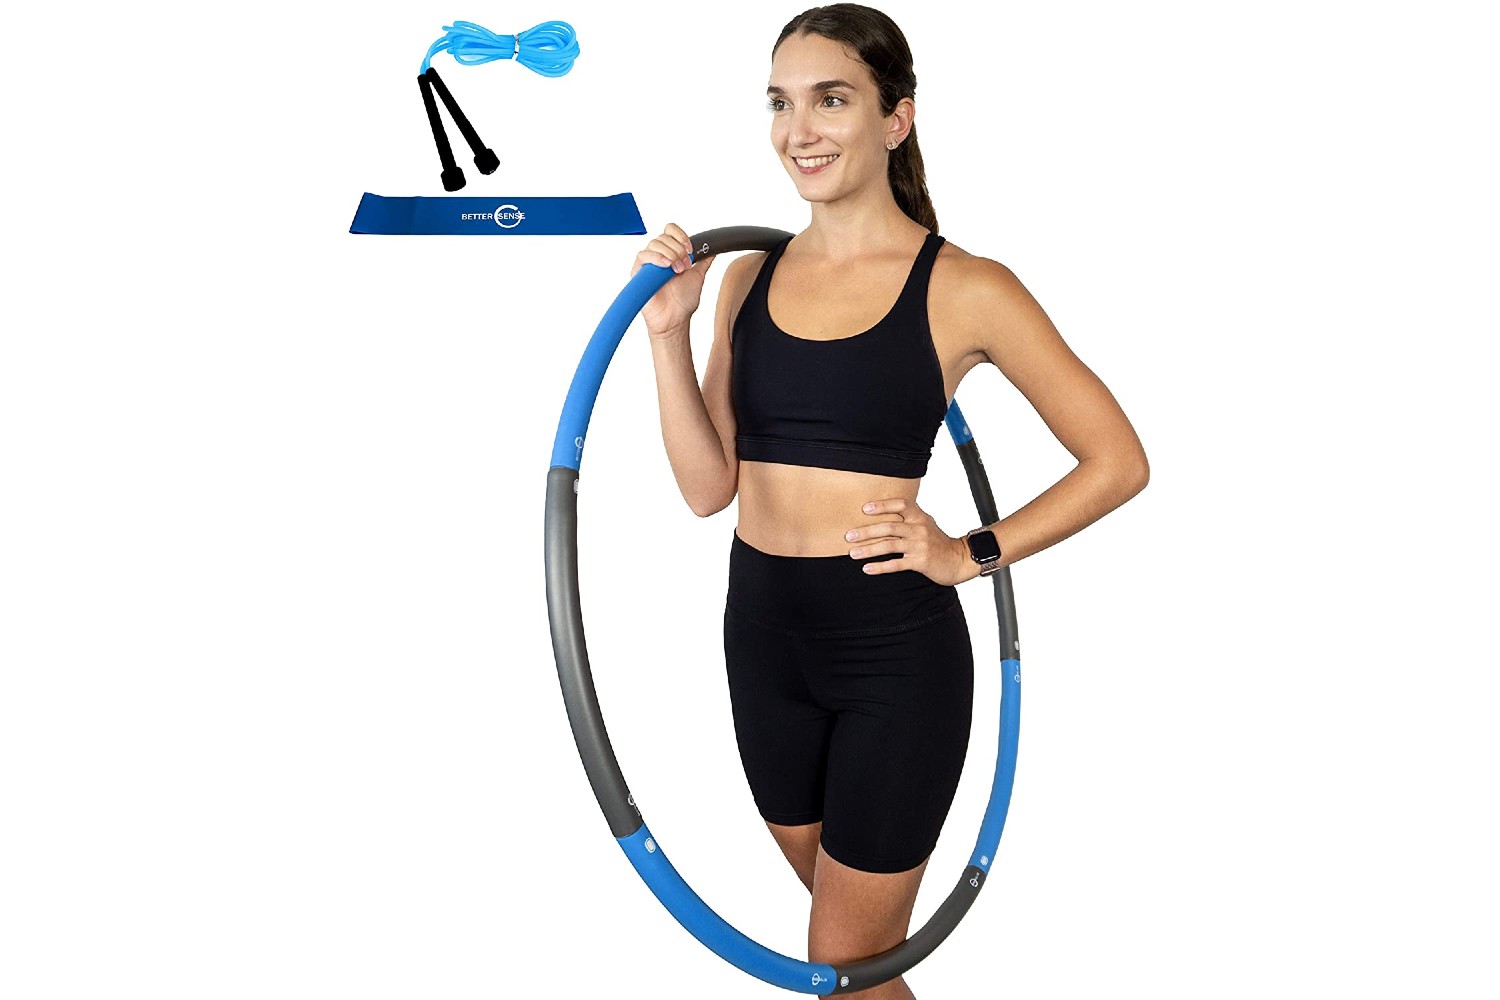 Fitness Equipment Foldable Fitness Wave Weighted Hula Hoop Foam Filled Gym Detachable Adult Children Assembly Design-Body Shaping and Weight Loss at Home MOCFLY Foam Sponge Plastic Hula Hoop 